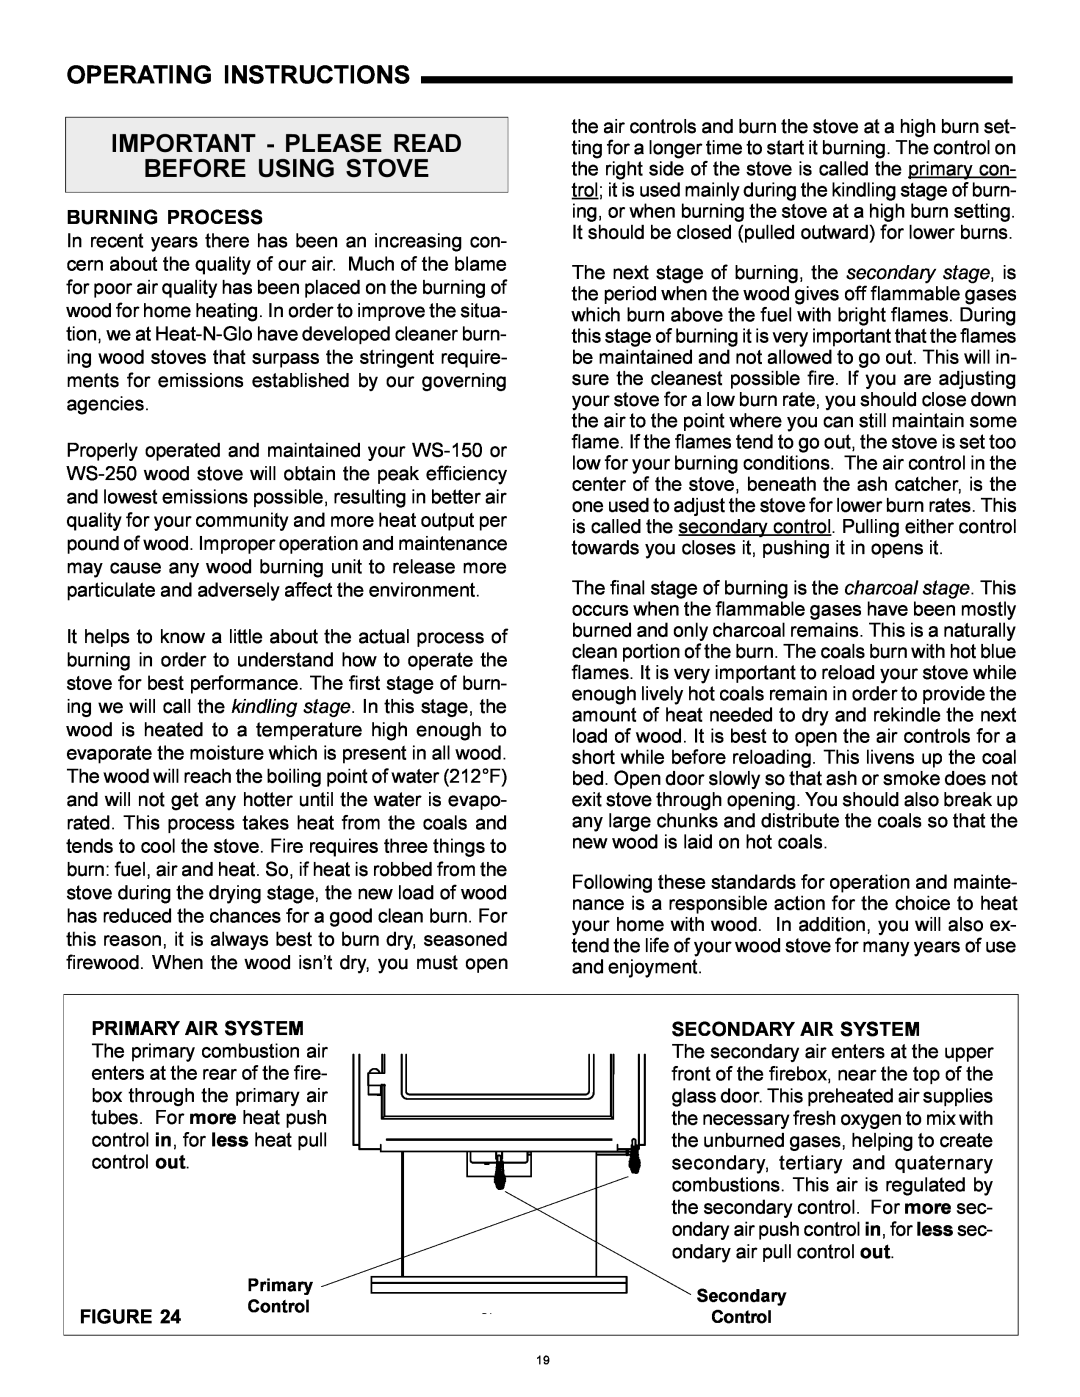 Heat & Glo LifeStyle WS-250, WS-150 Operating Instructions Important - Please Read, Before Using Stove, Burning Process 